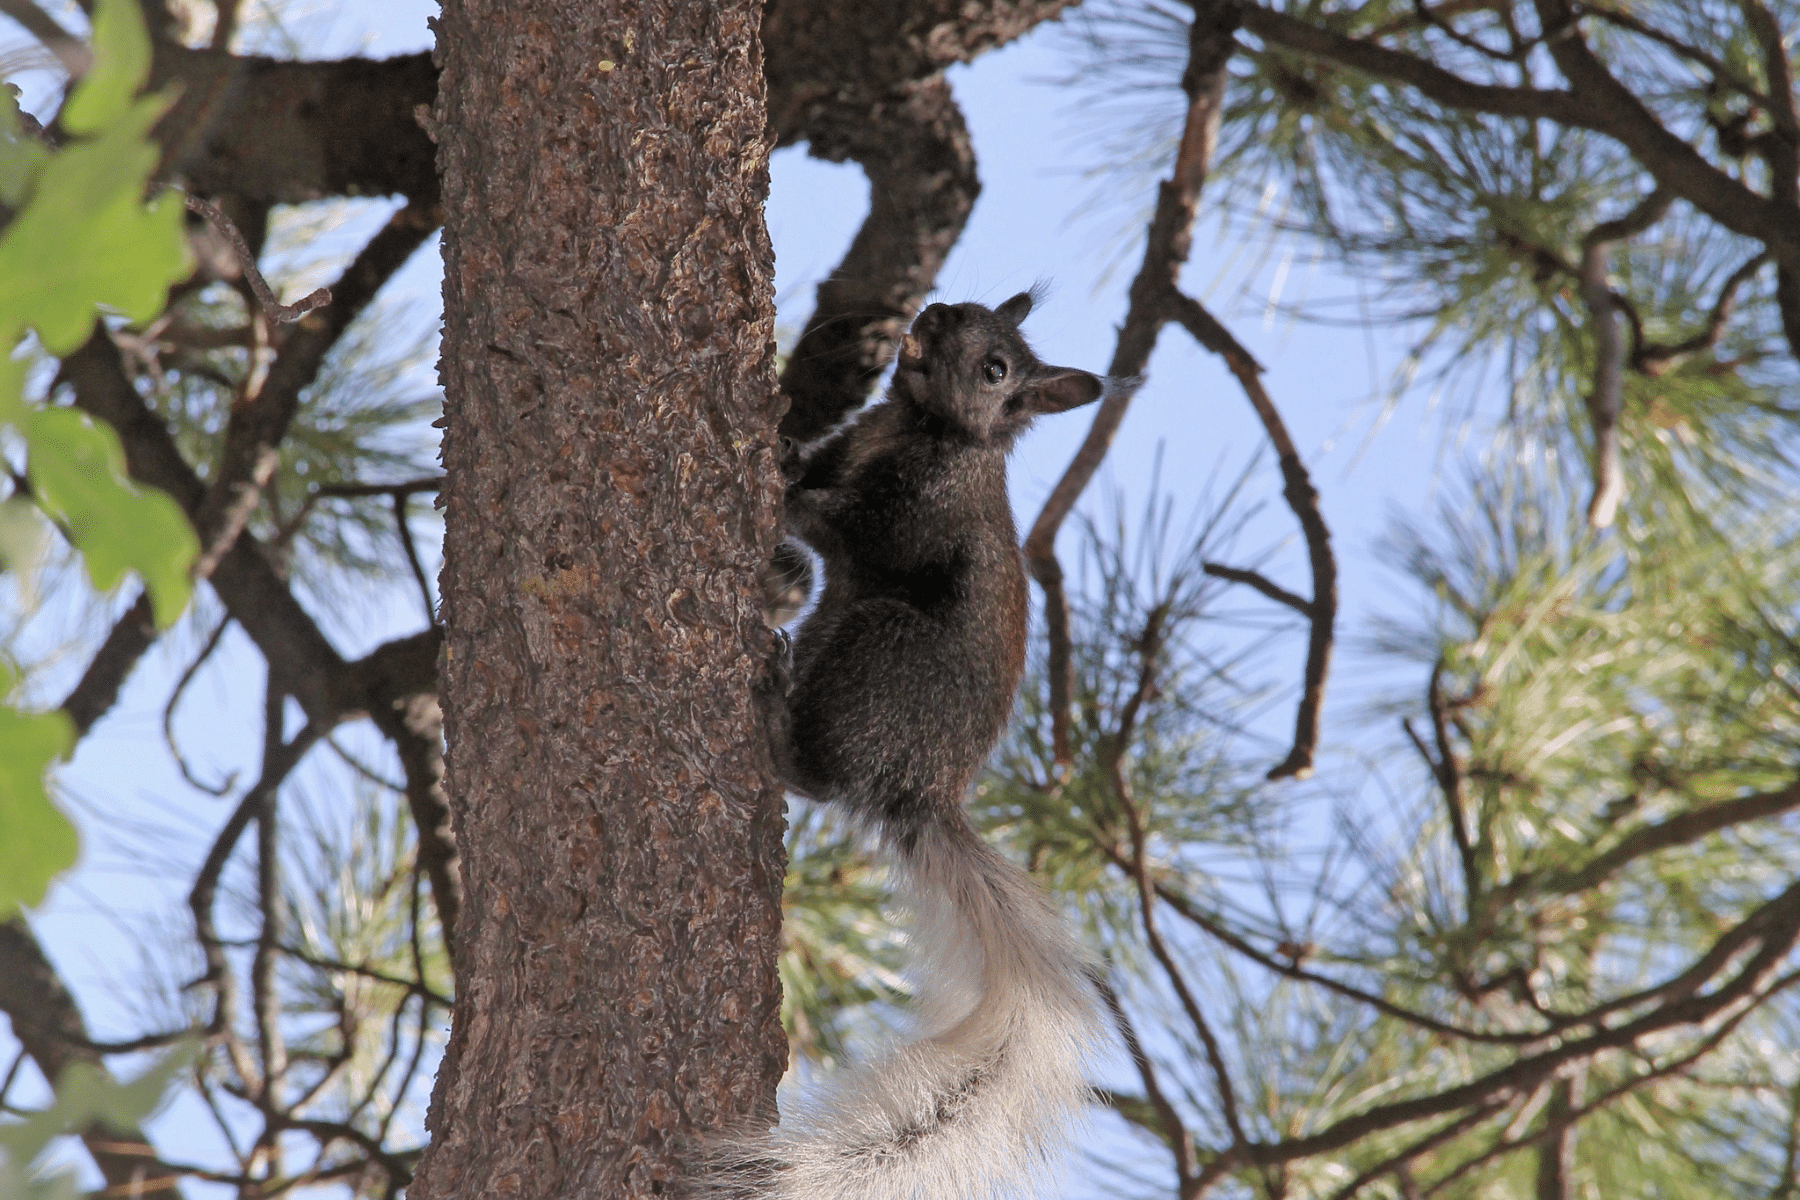 A Kaibab squirrel eats in a Ponderosa pine tree near the North Rim of the Grand Canyon.